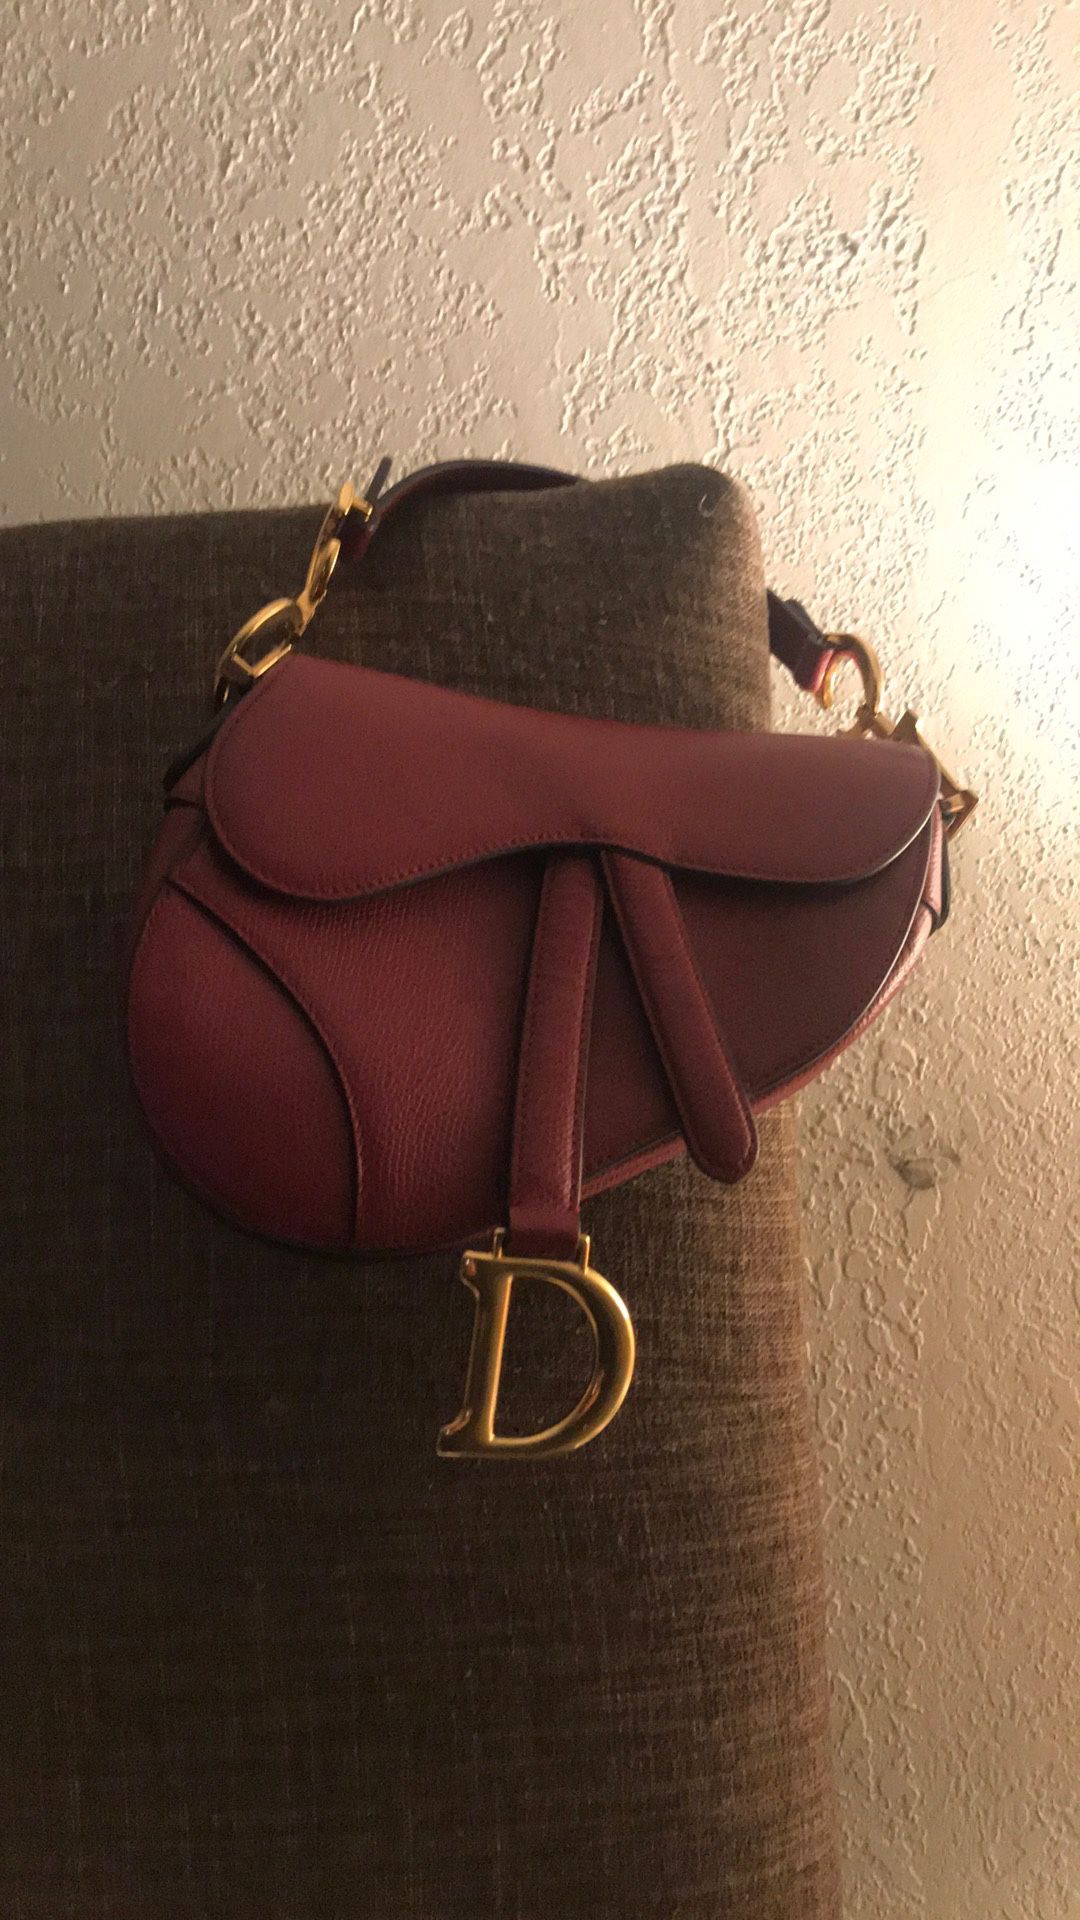 AUTHENTIC CHERRY RED DIOR MINI SADDLE BAG PEBBLED CALFSKIN LEATHER 2018